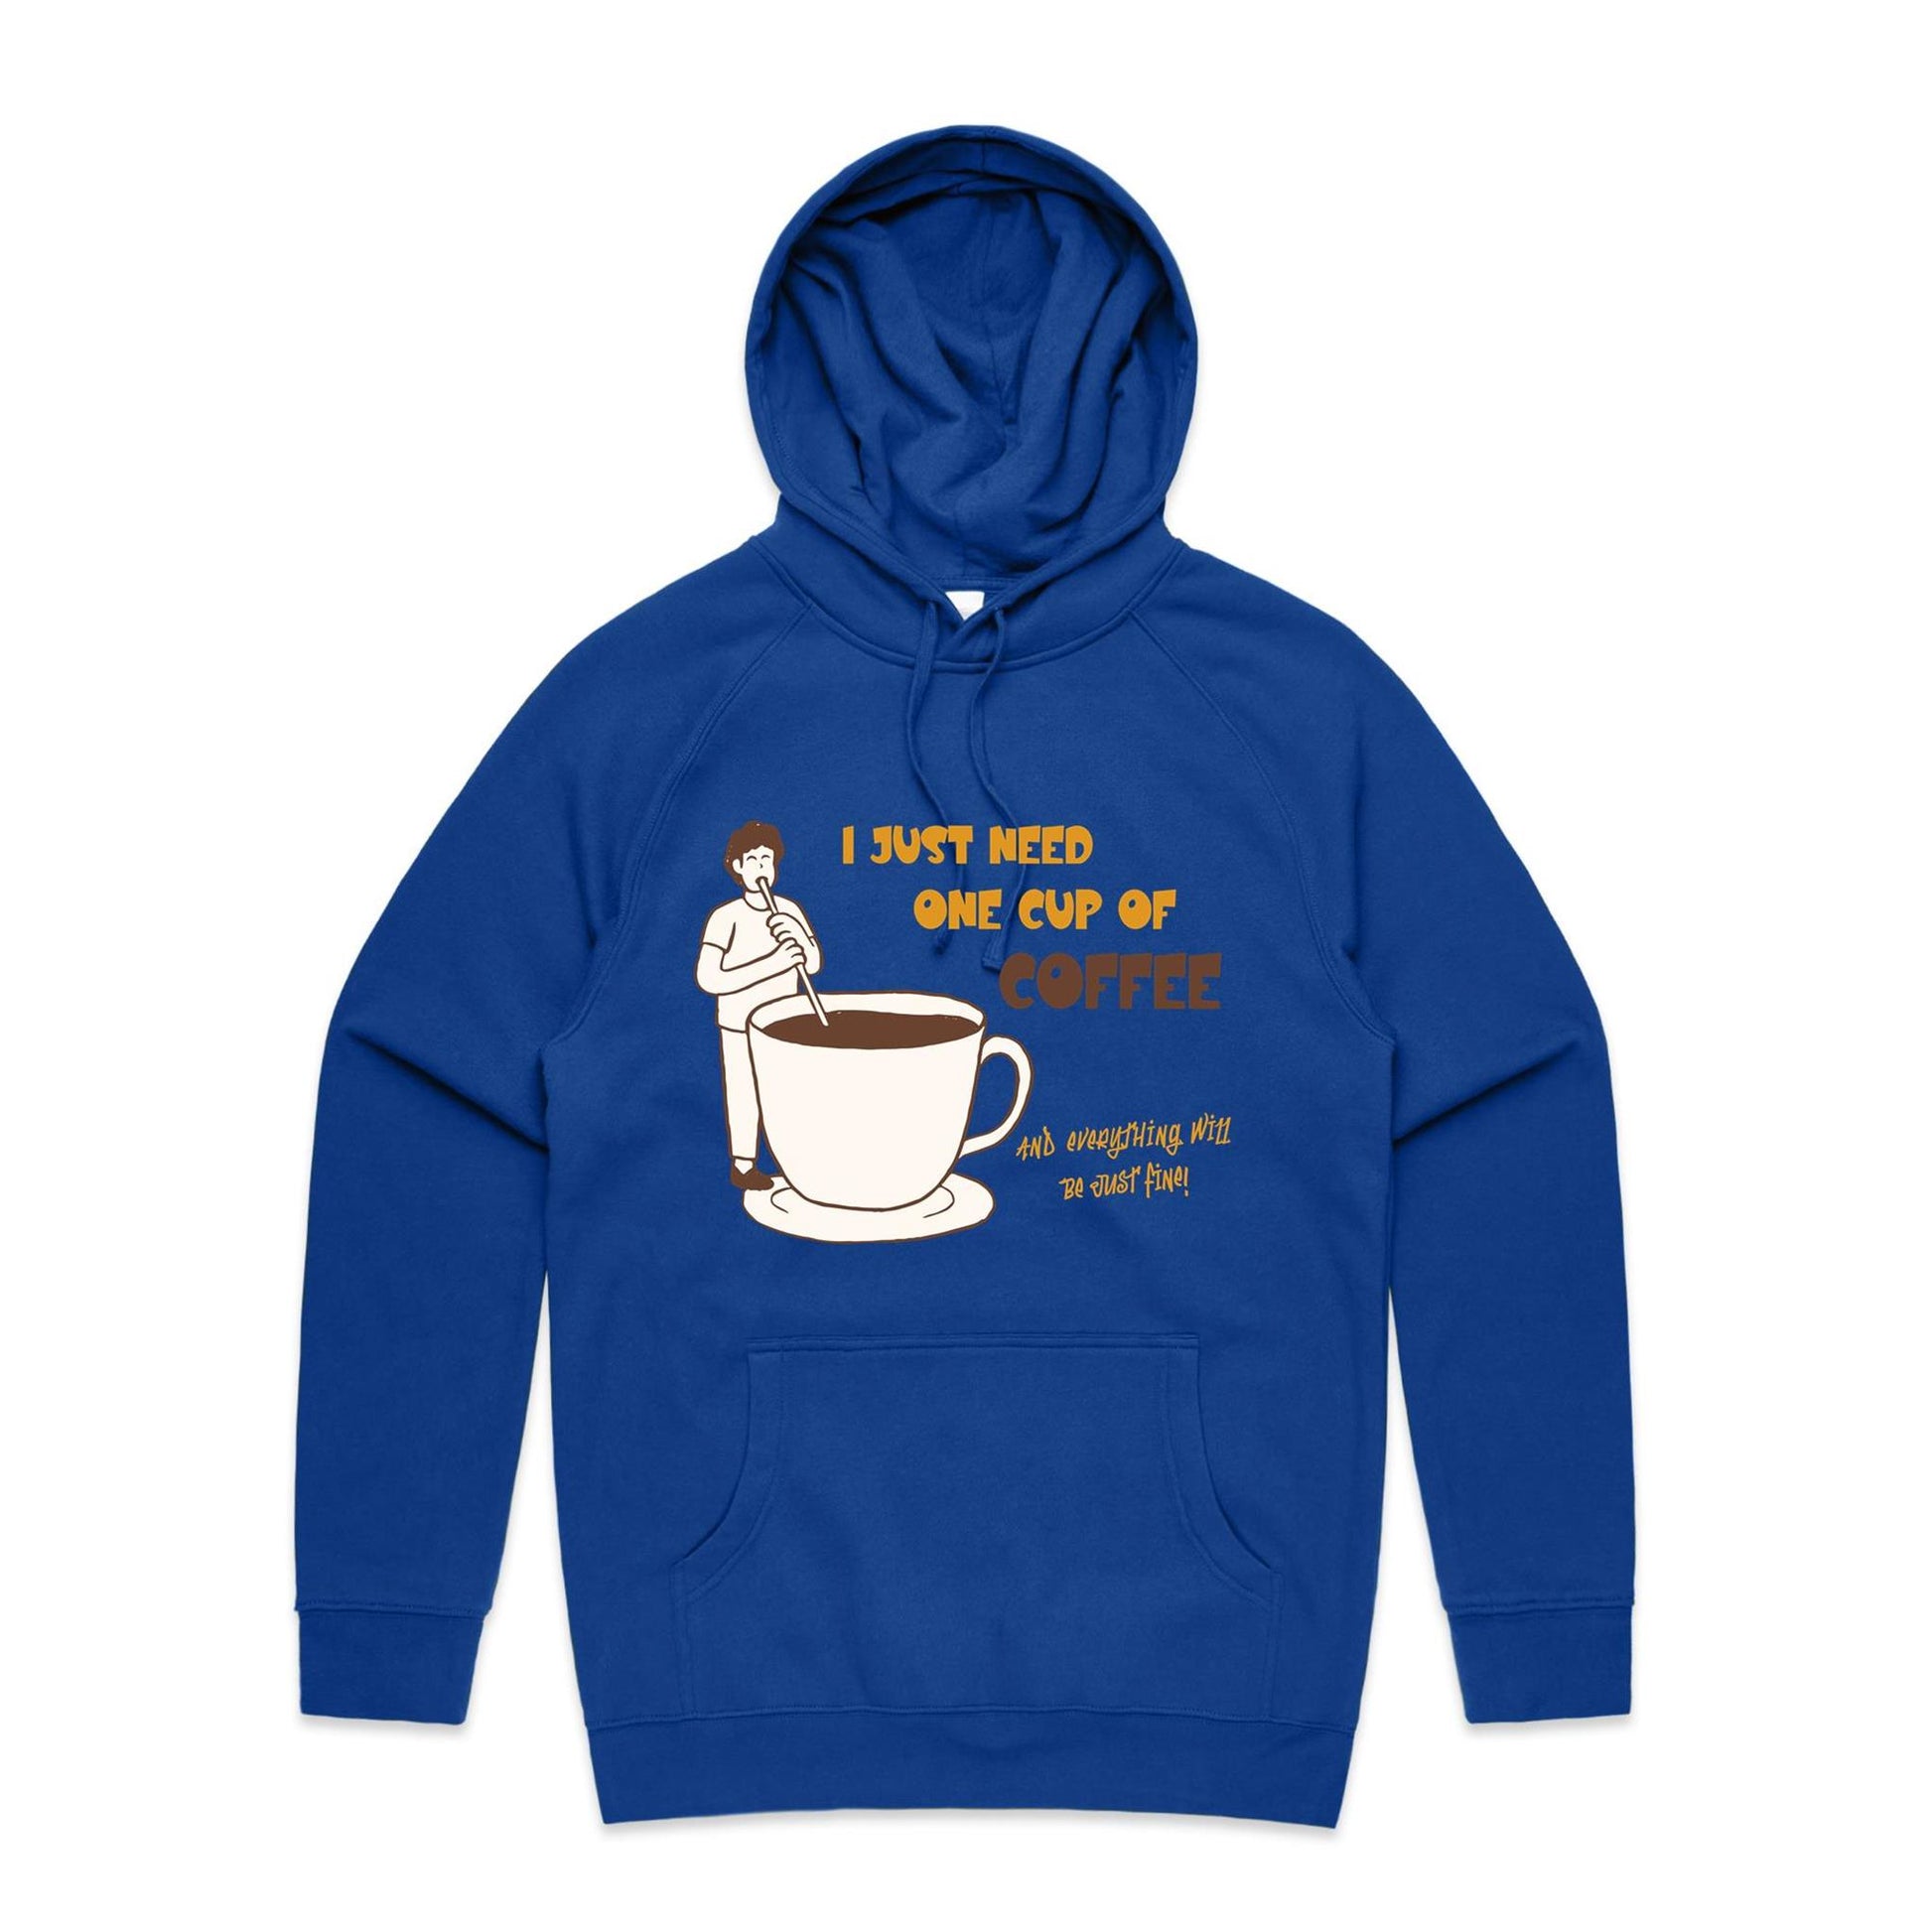 I Just Need One Cup Of Coffee And Everything Will Be Just Fine - Supply Hood Bright Royal Mens Supply Hoodie Coffee